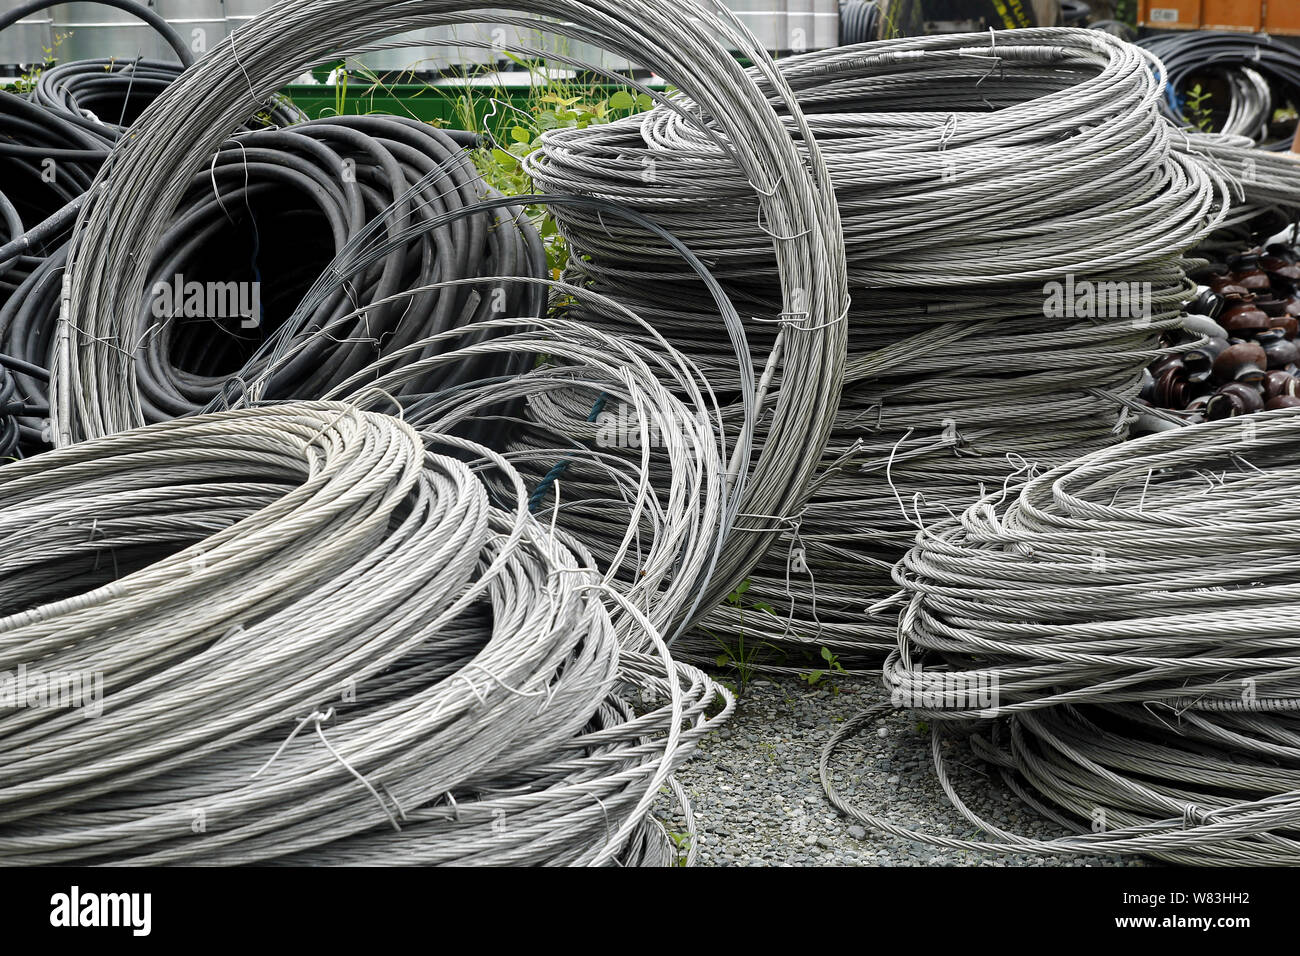 Photo of rolls of metal or steel cables used for electric poles at an industrial yard Stock Photo